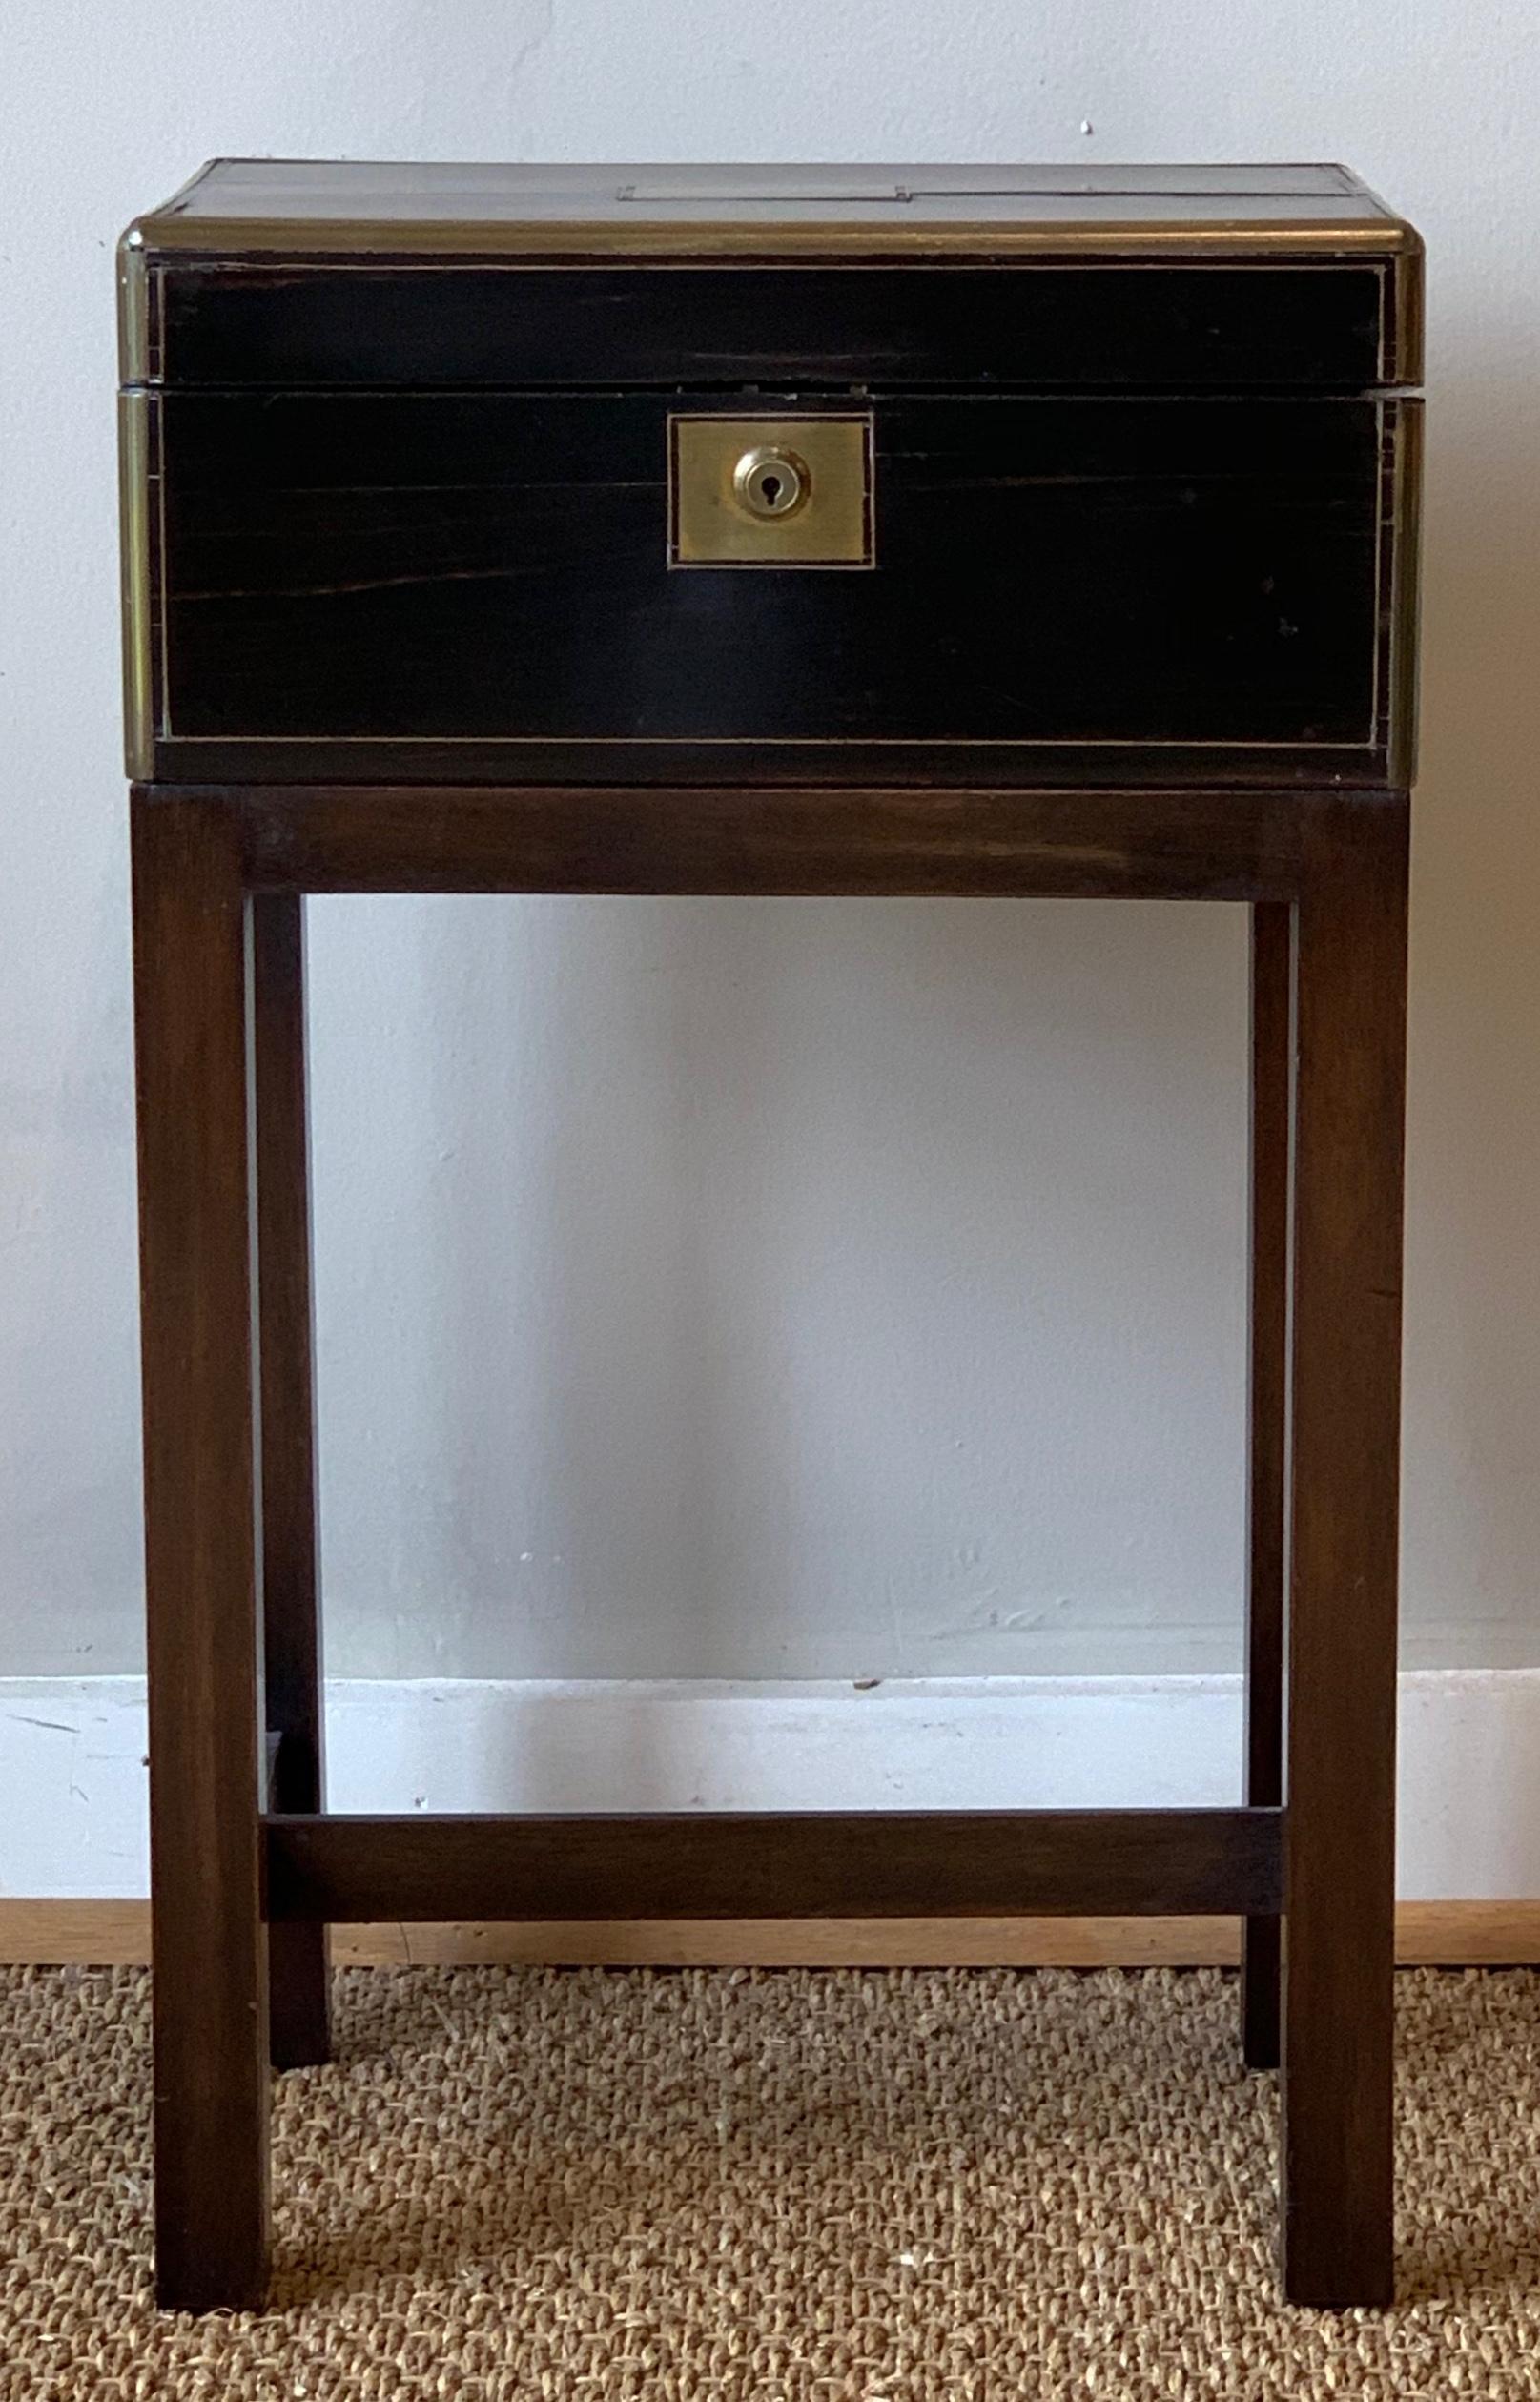 A lovely mid-19th century English Macassar wood and brass writing box fitted with its original fold-out leather writing surface and ink wells on later custom made stand to function as a side table.